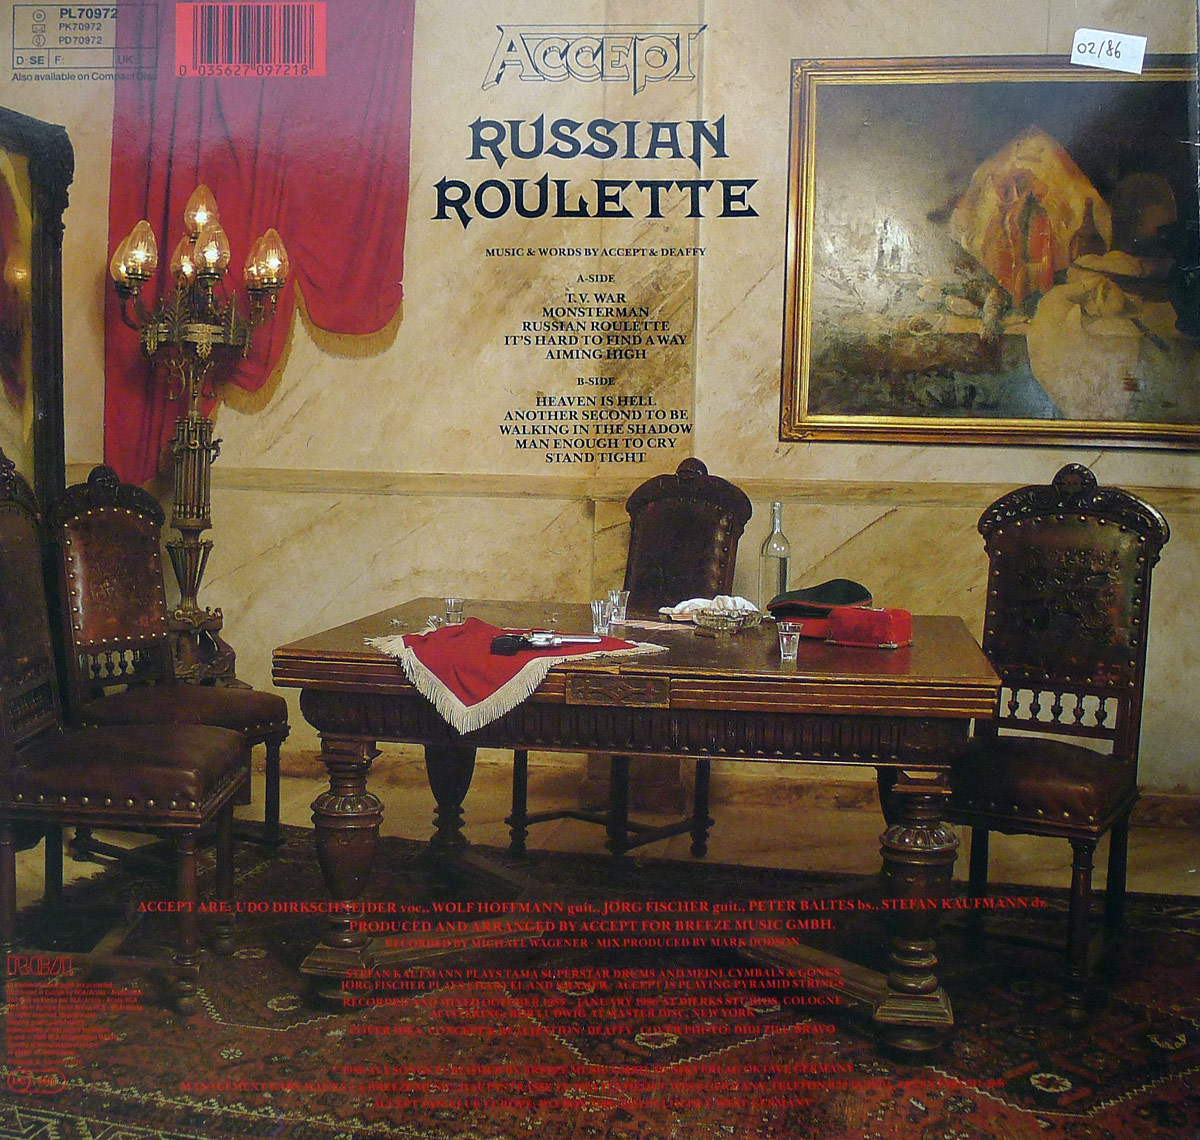 Hires photo of album back cover of Accept's Russian Roulette 